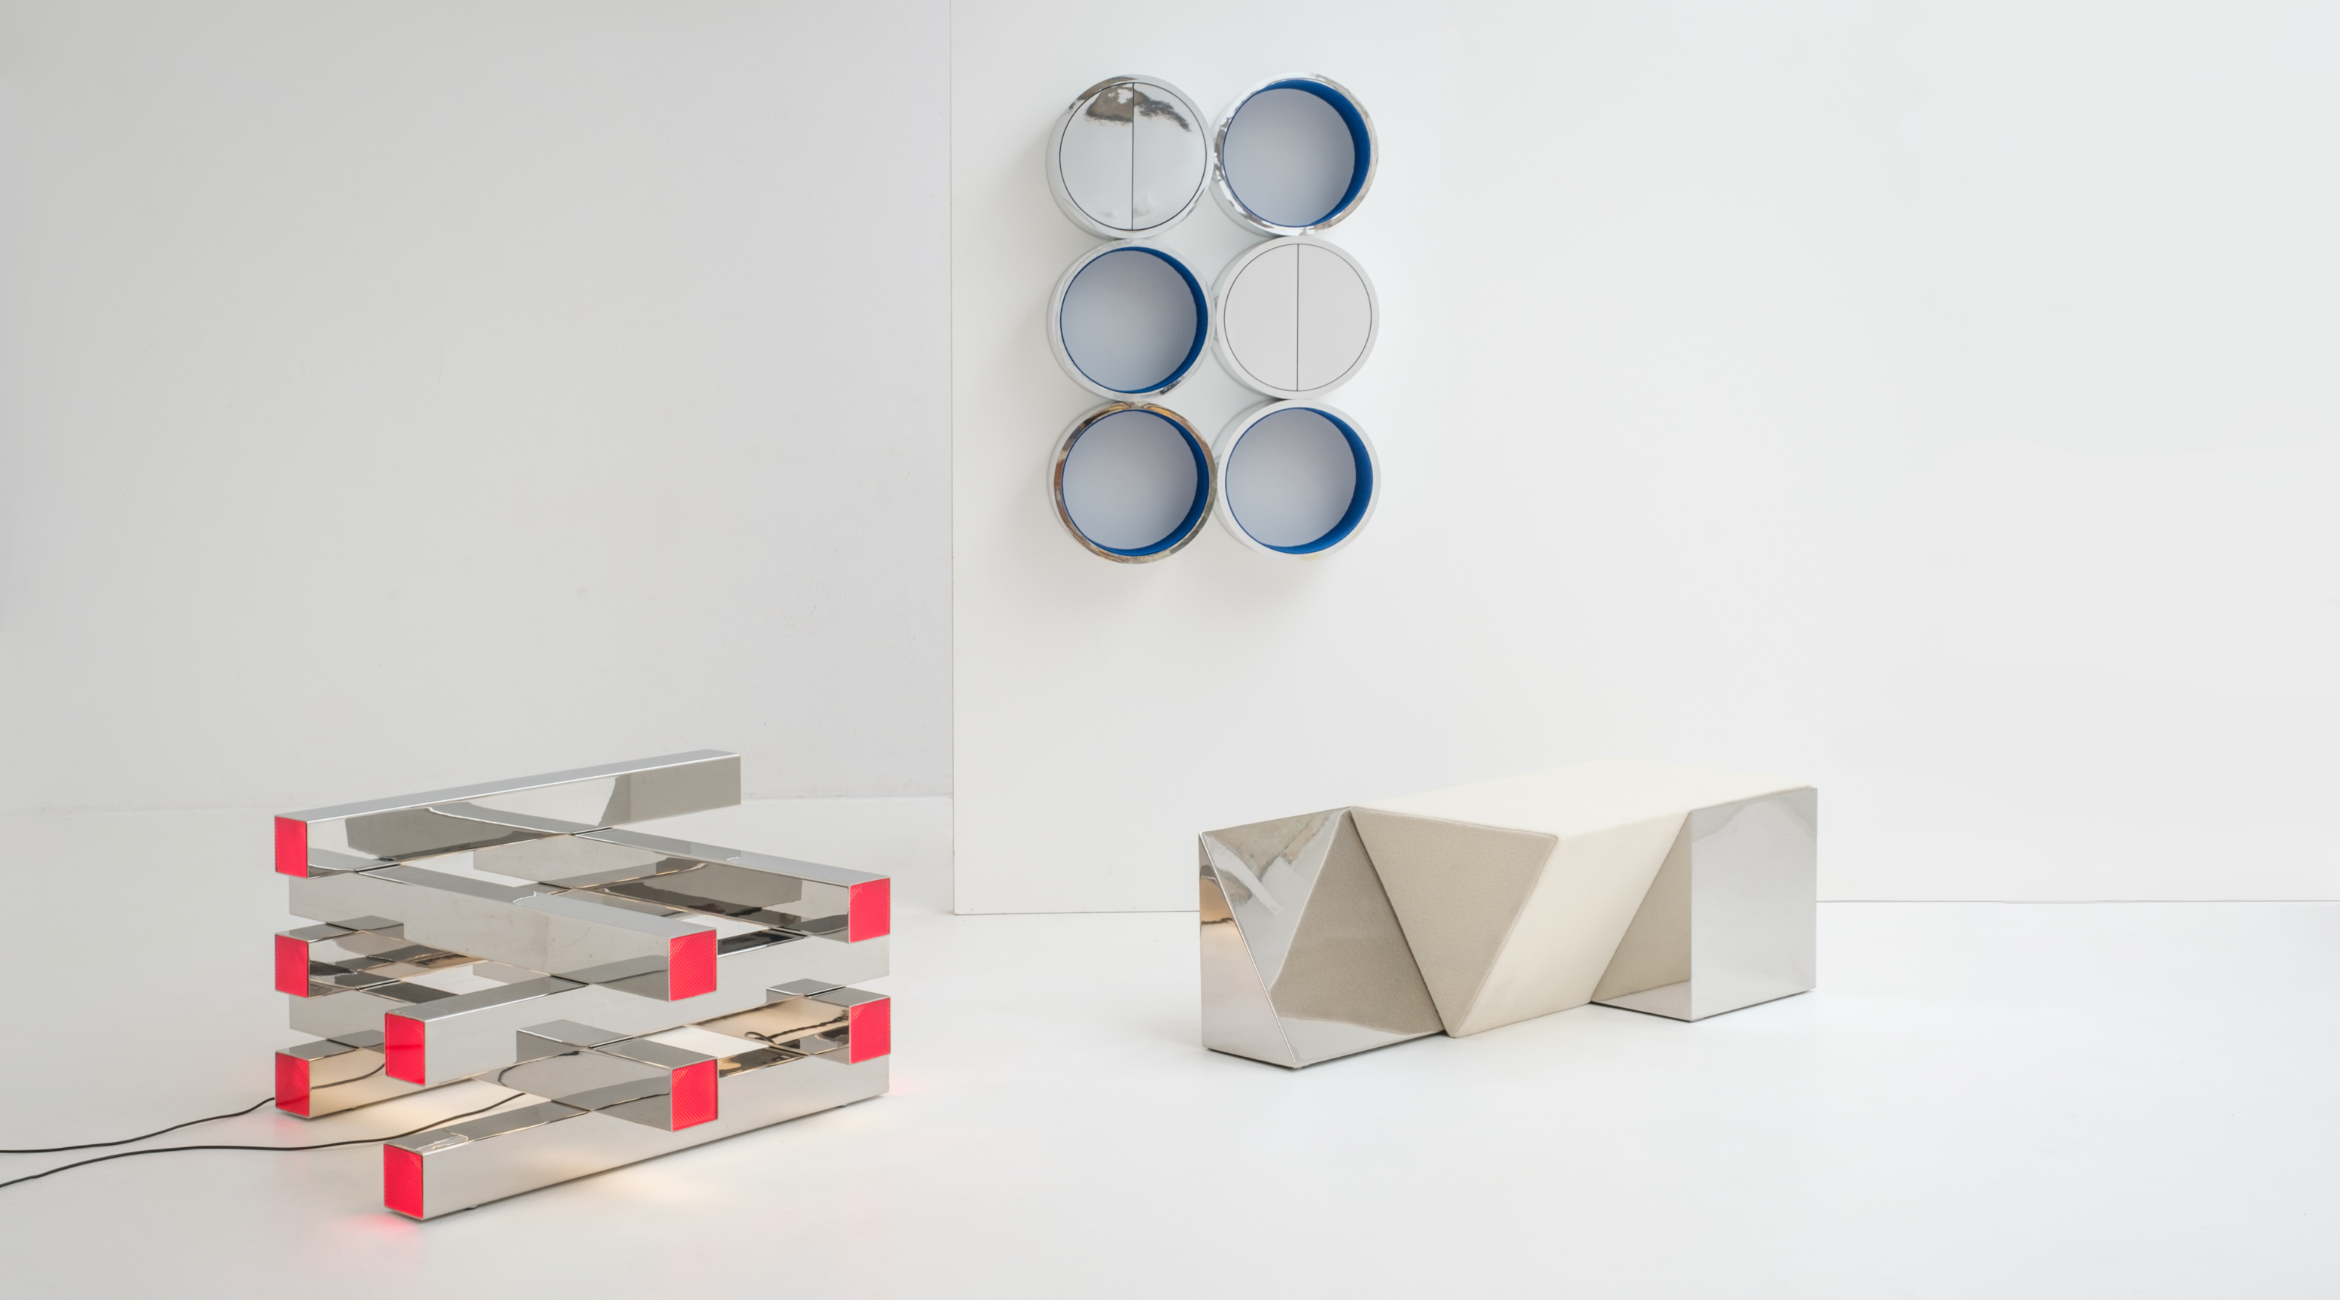 wnew collection of sculptural objects by nortstudio